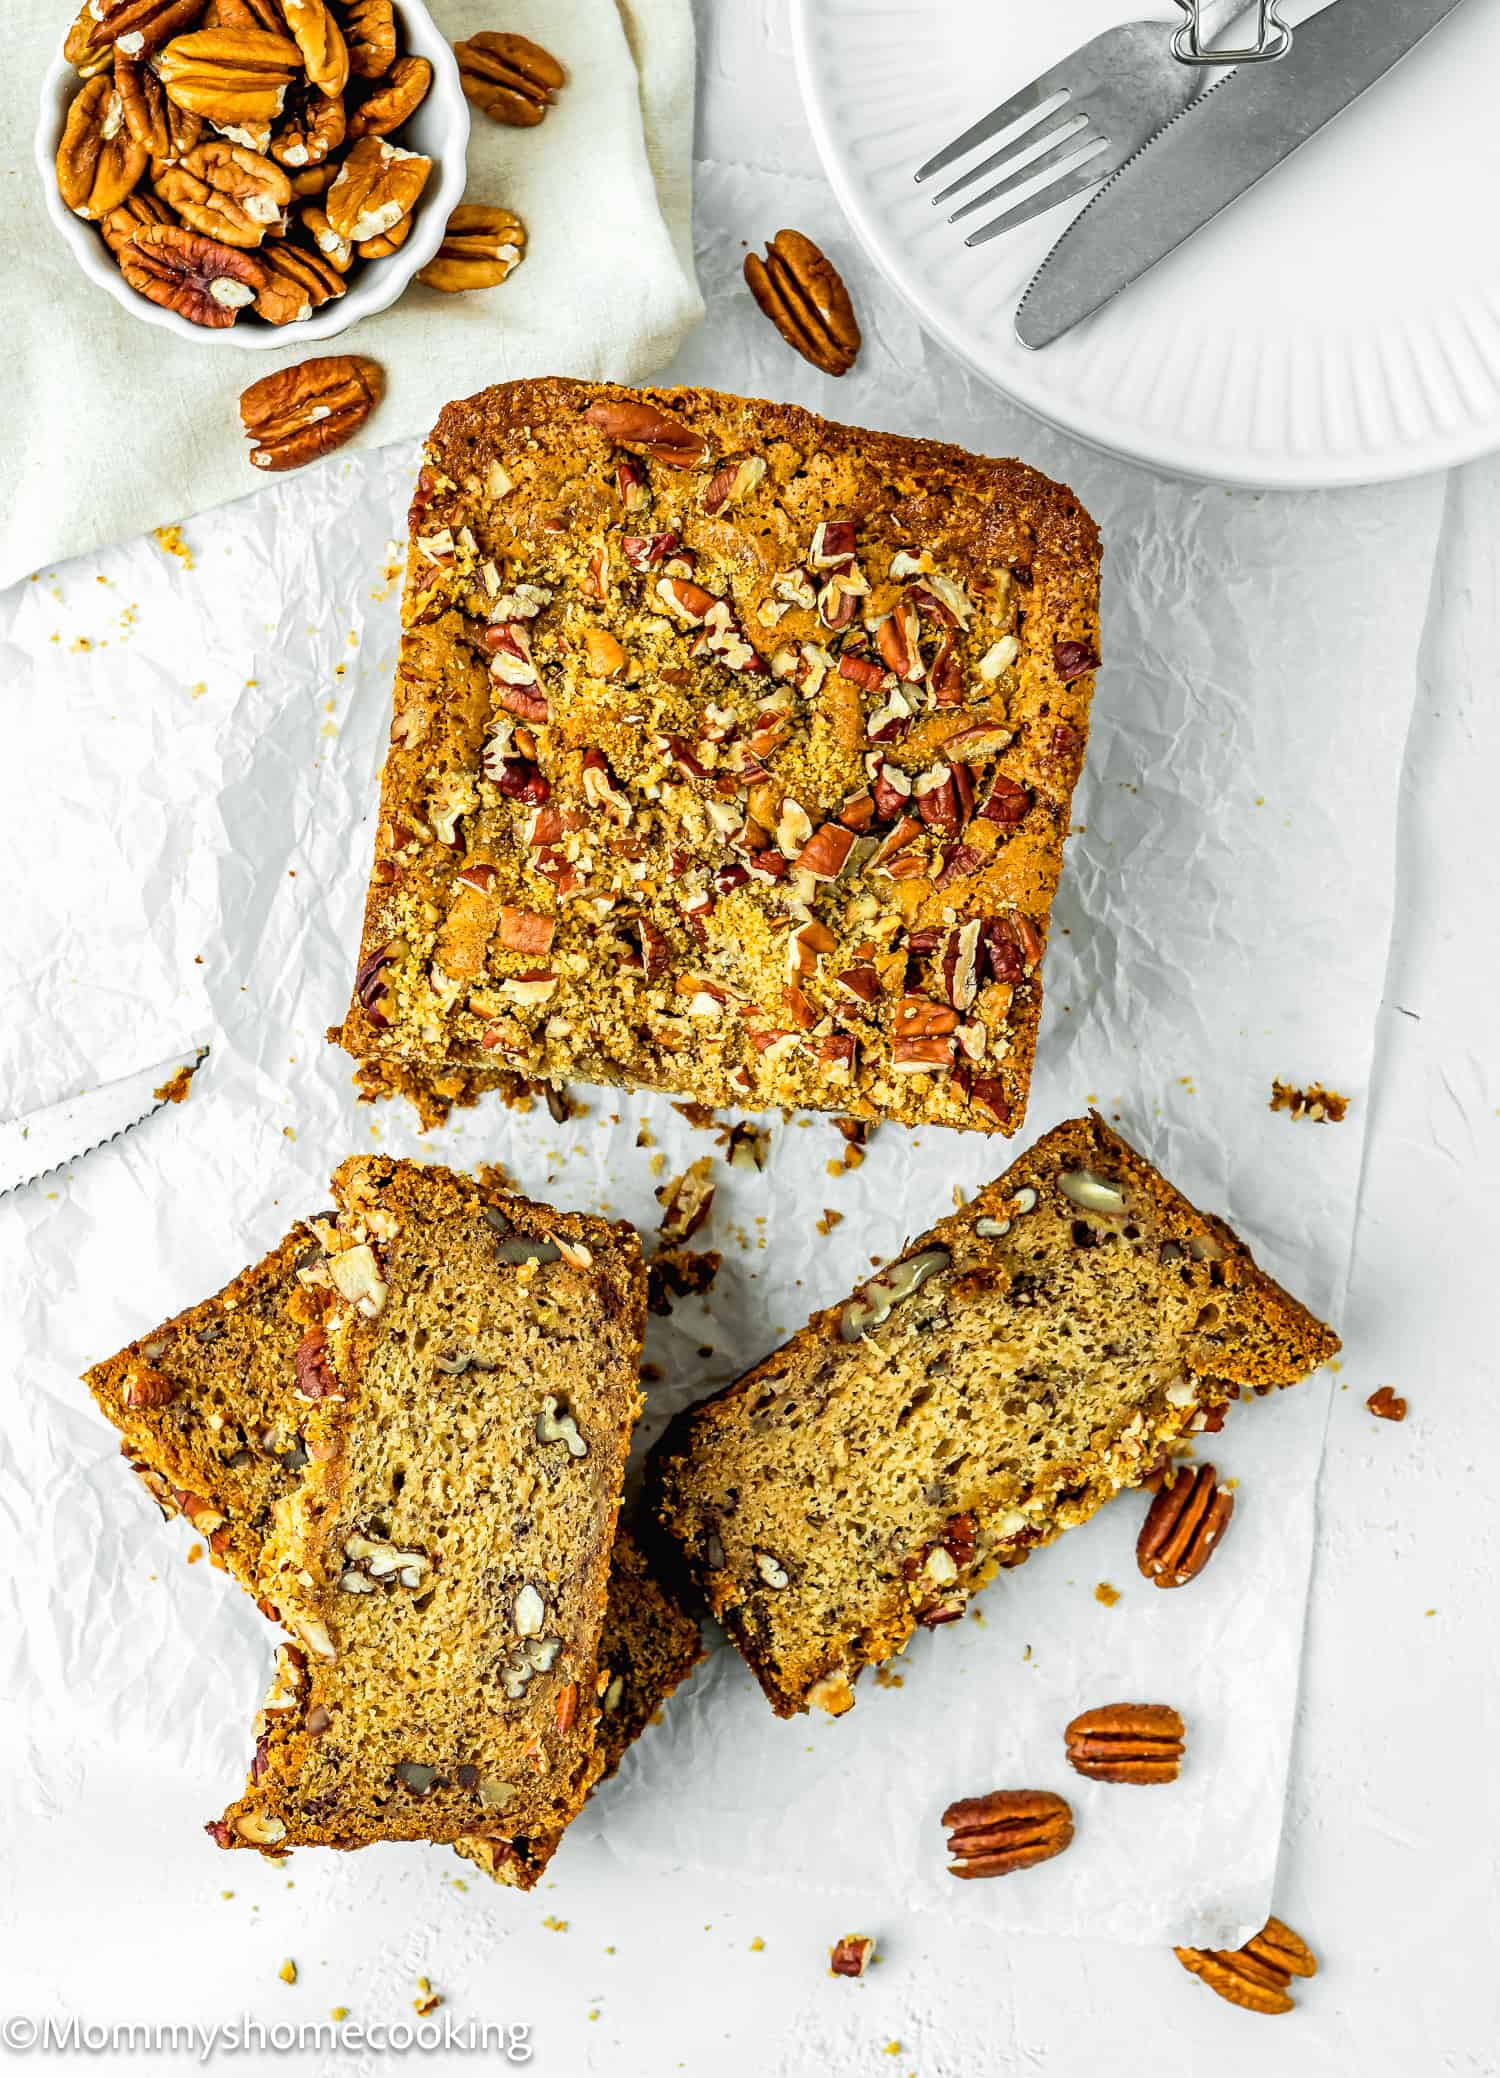 An Easy Banana Nut Bread Without Eggs sliced over a piece of parchment paper.